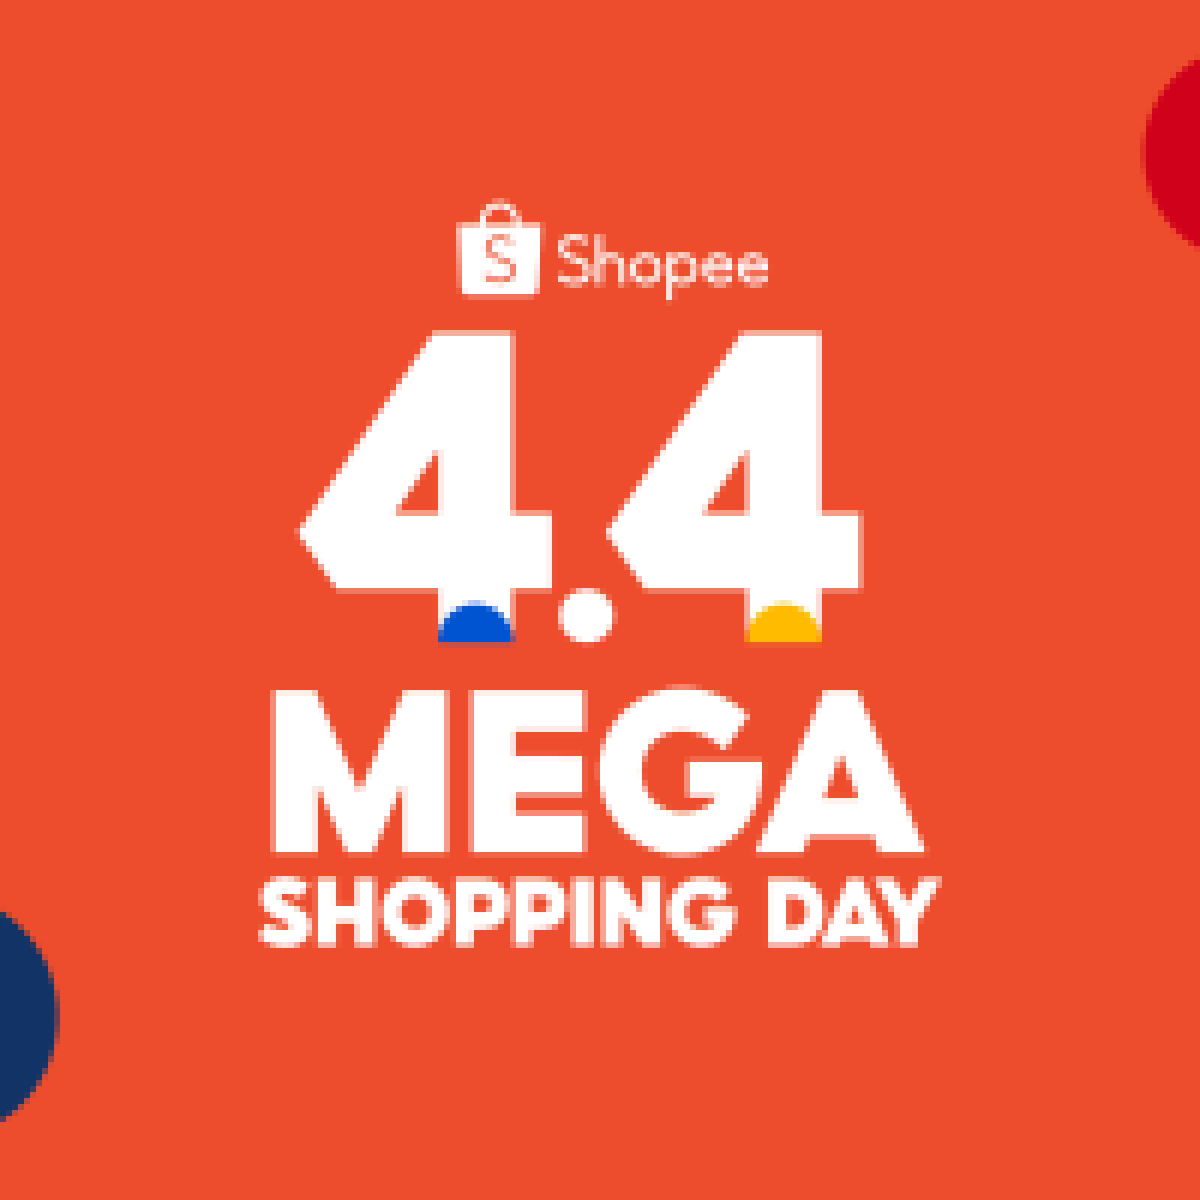 Everything you need to know about Shopee's 4.4 Mega Shopping Day